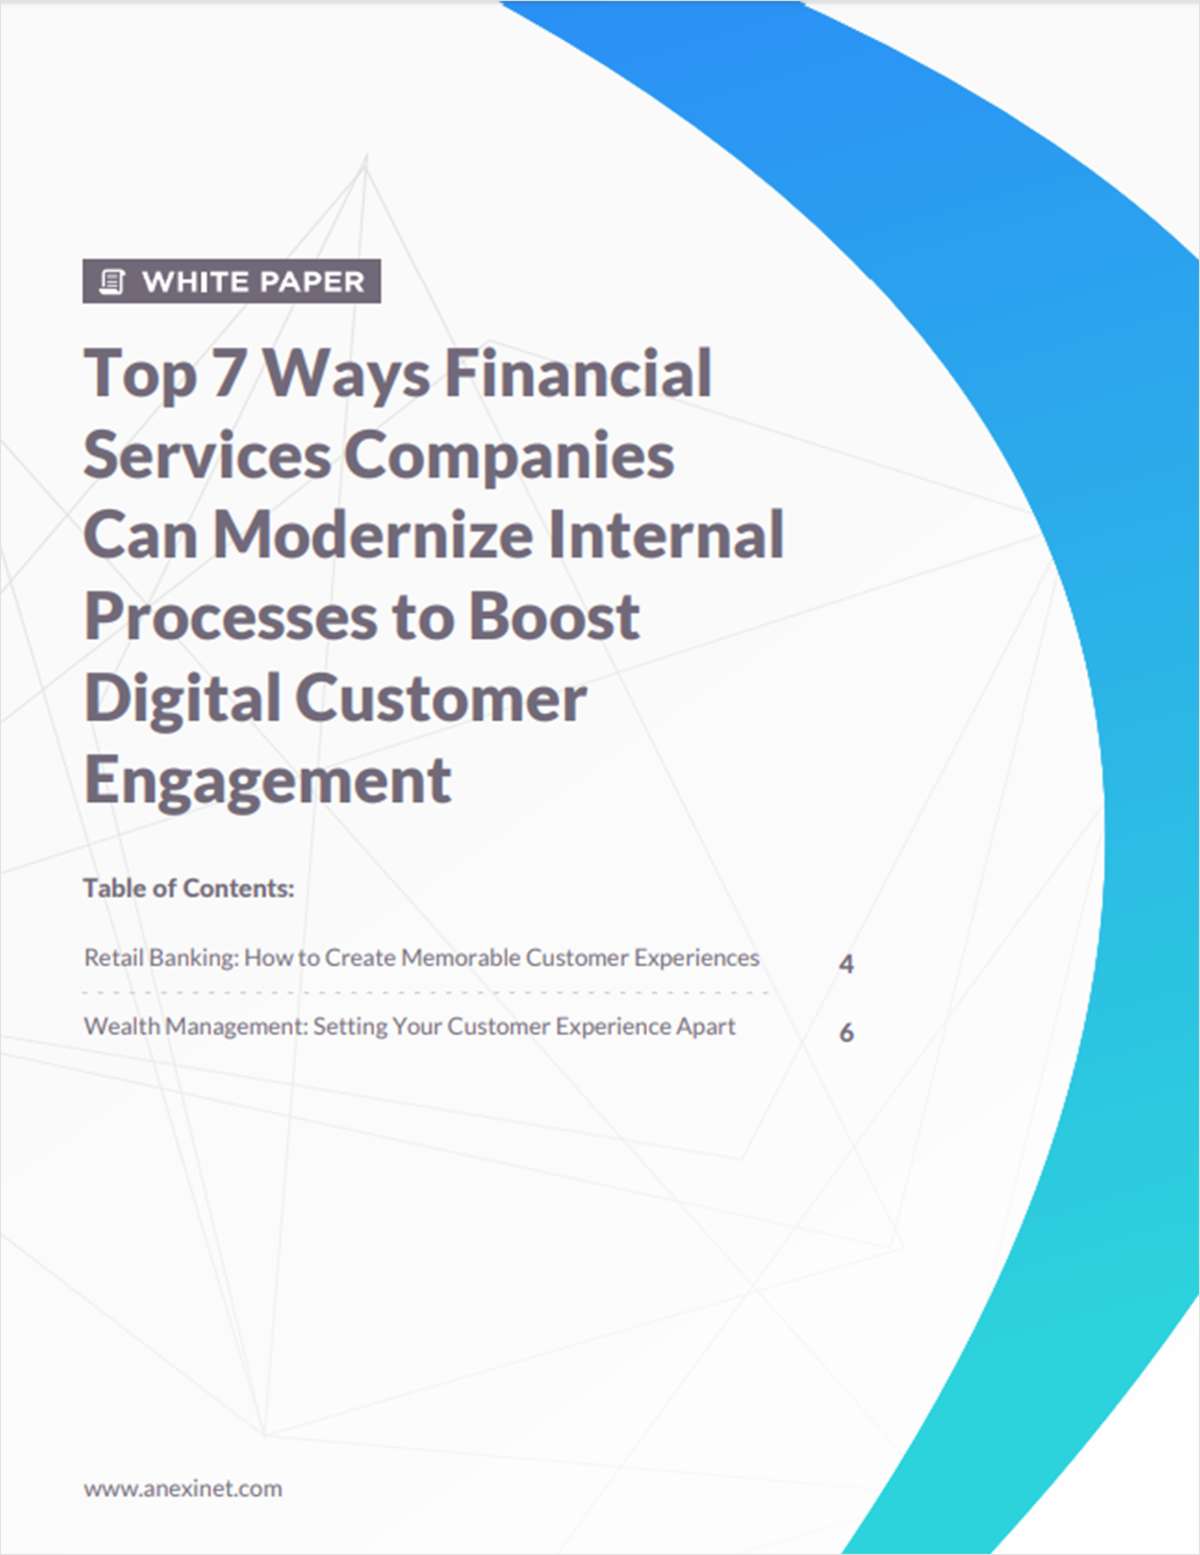 Top 7 Ways Financial Services Companies Can Modernize Internal Processes to Boost Digital Customer Engagement